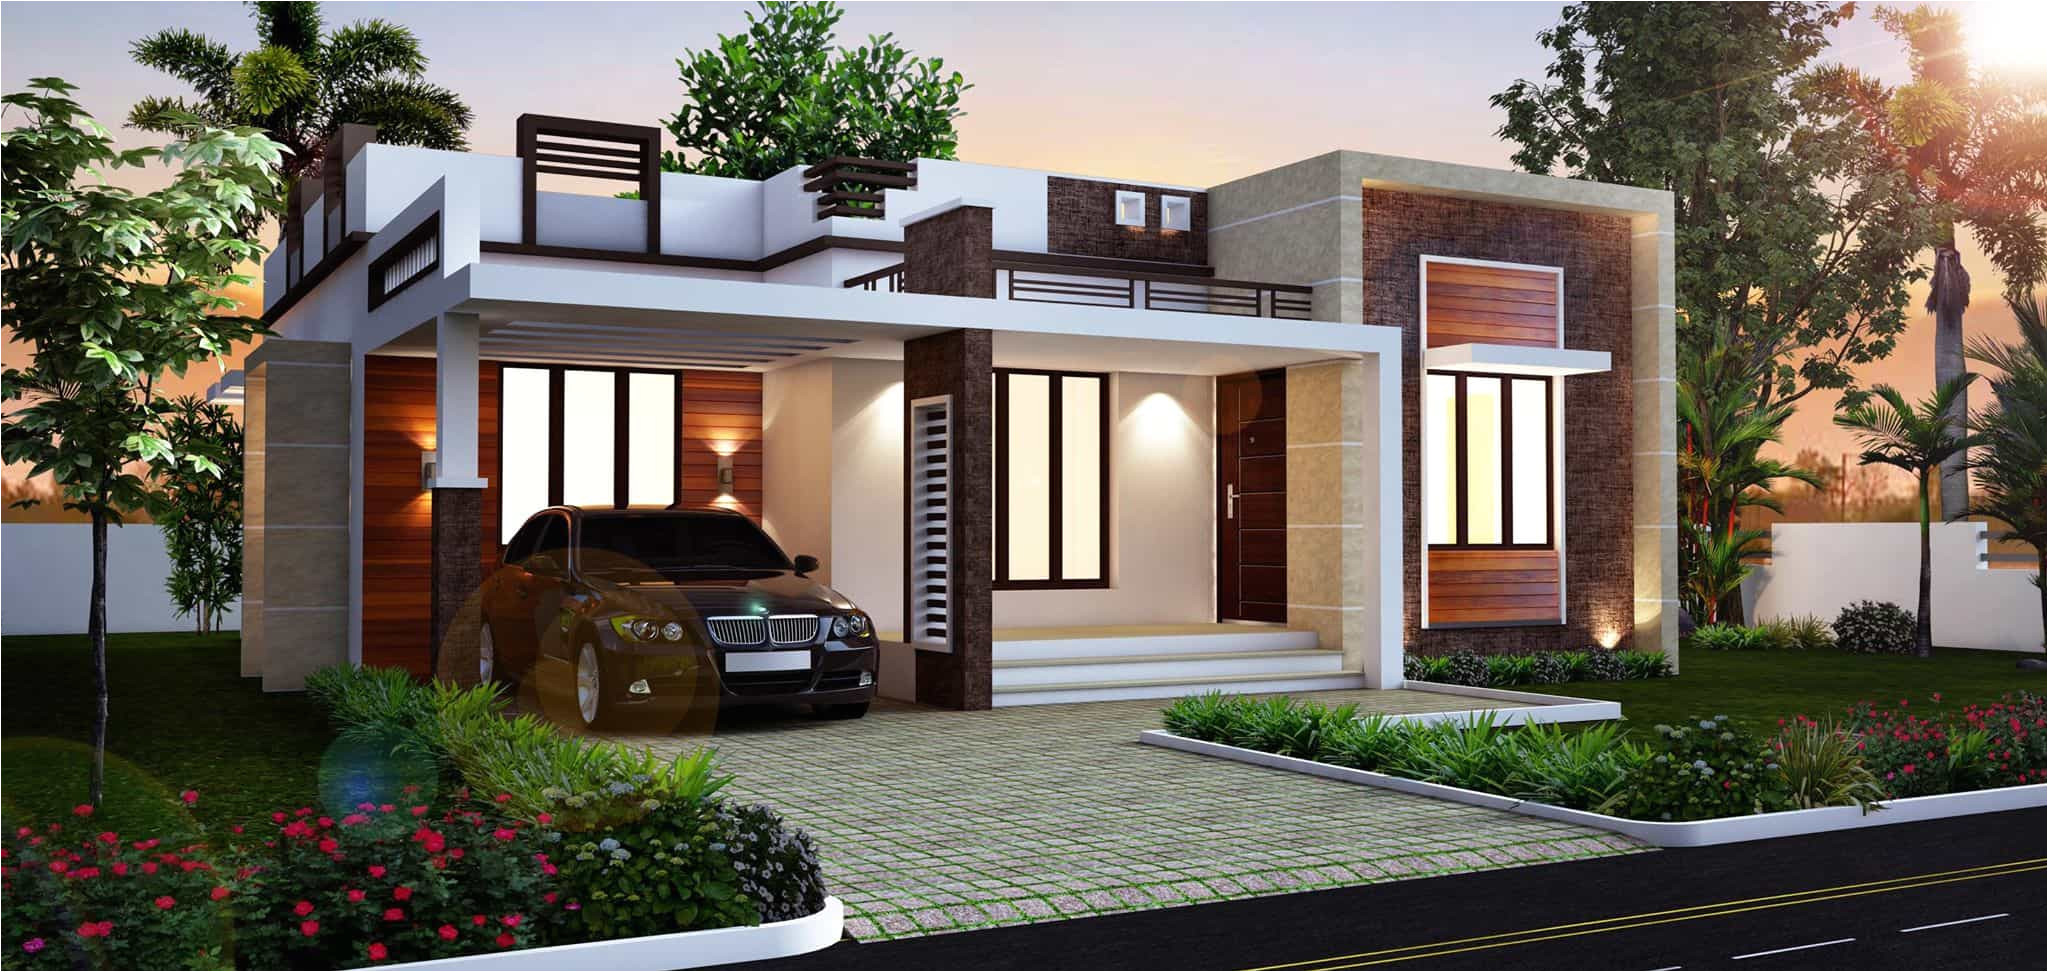 Home Design Plans with Photos In Kerala Kerala Home Design House Plans Indian Budget Models